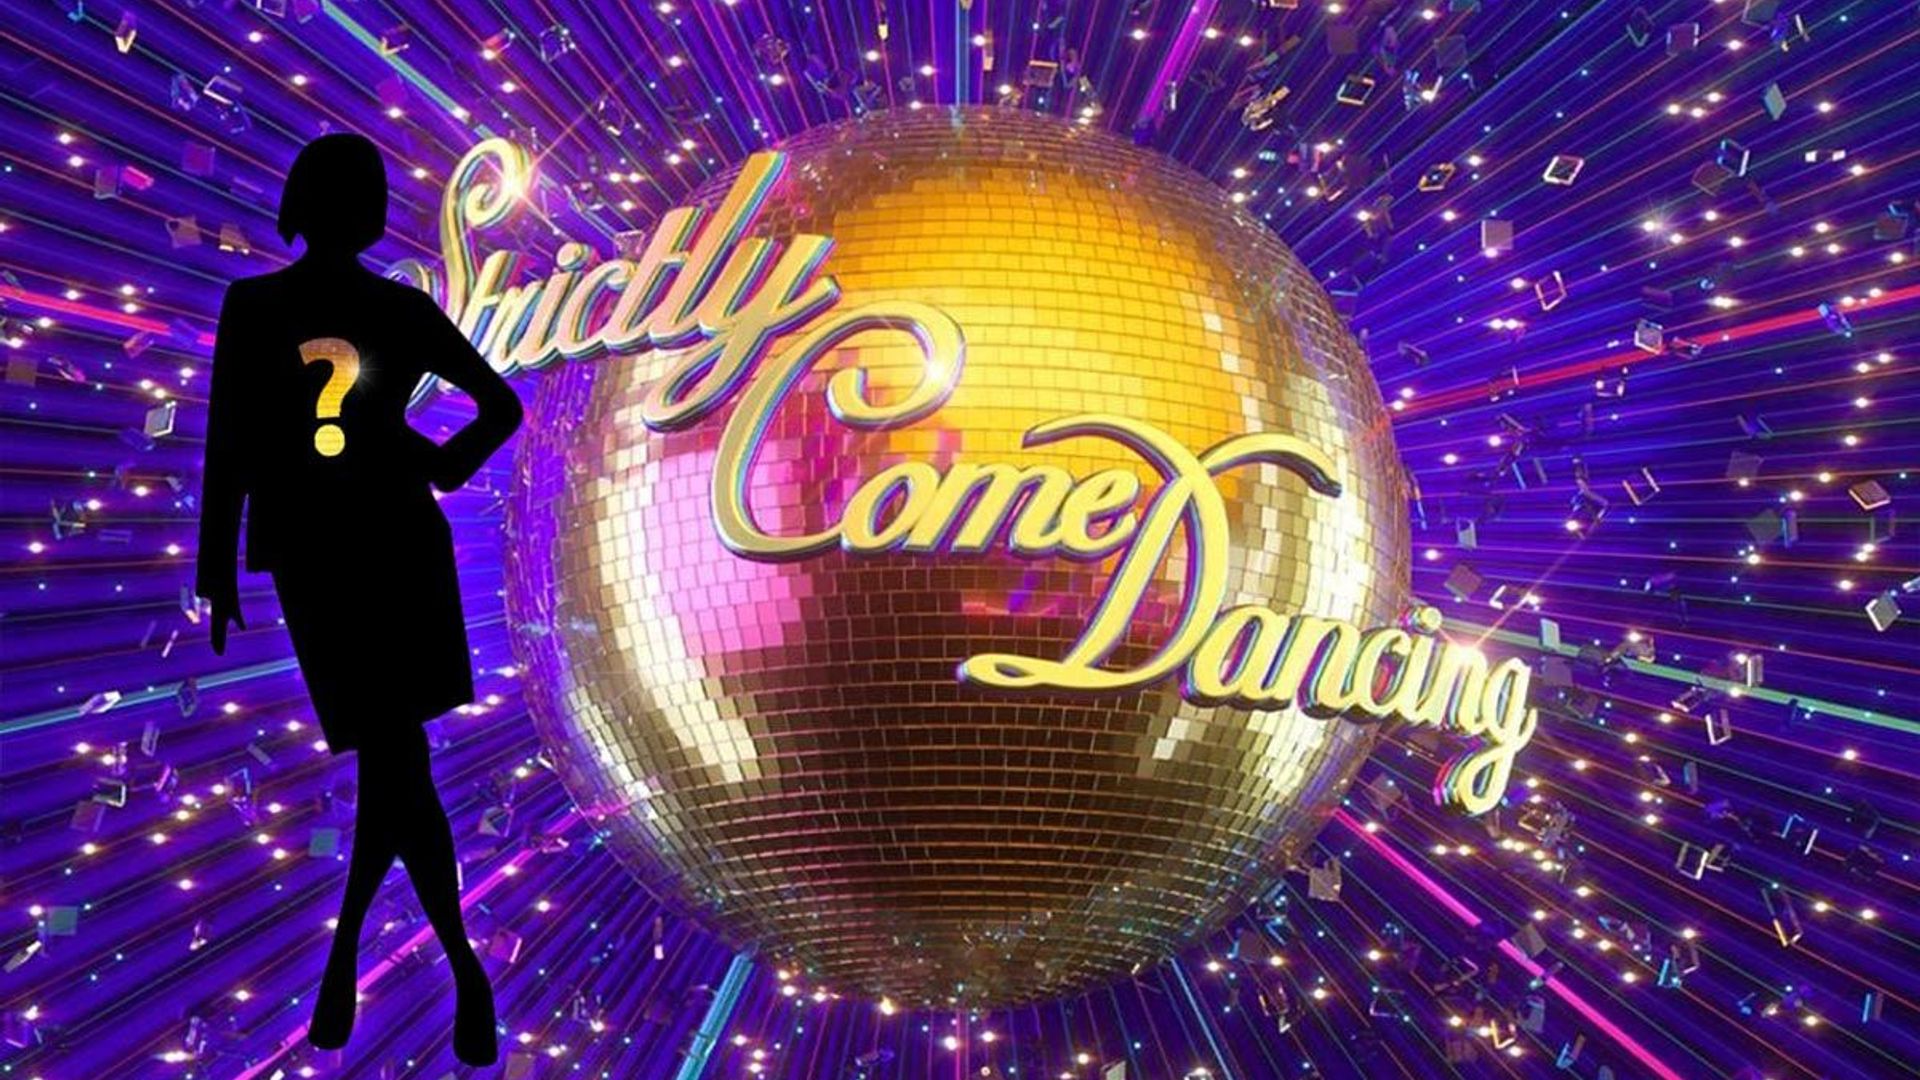 Eamonn Holmes and Ruth Langsford reveal ninth Strictly Come Dancing contestant - find out who!